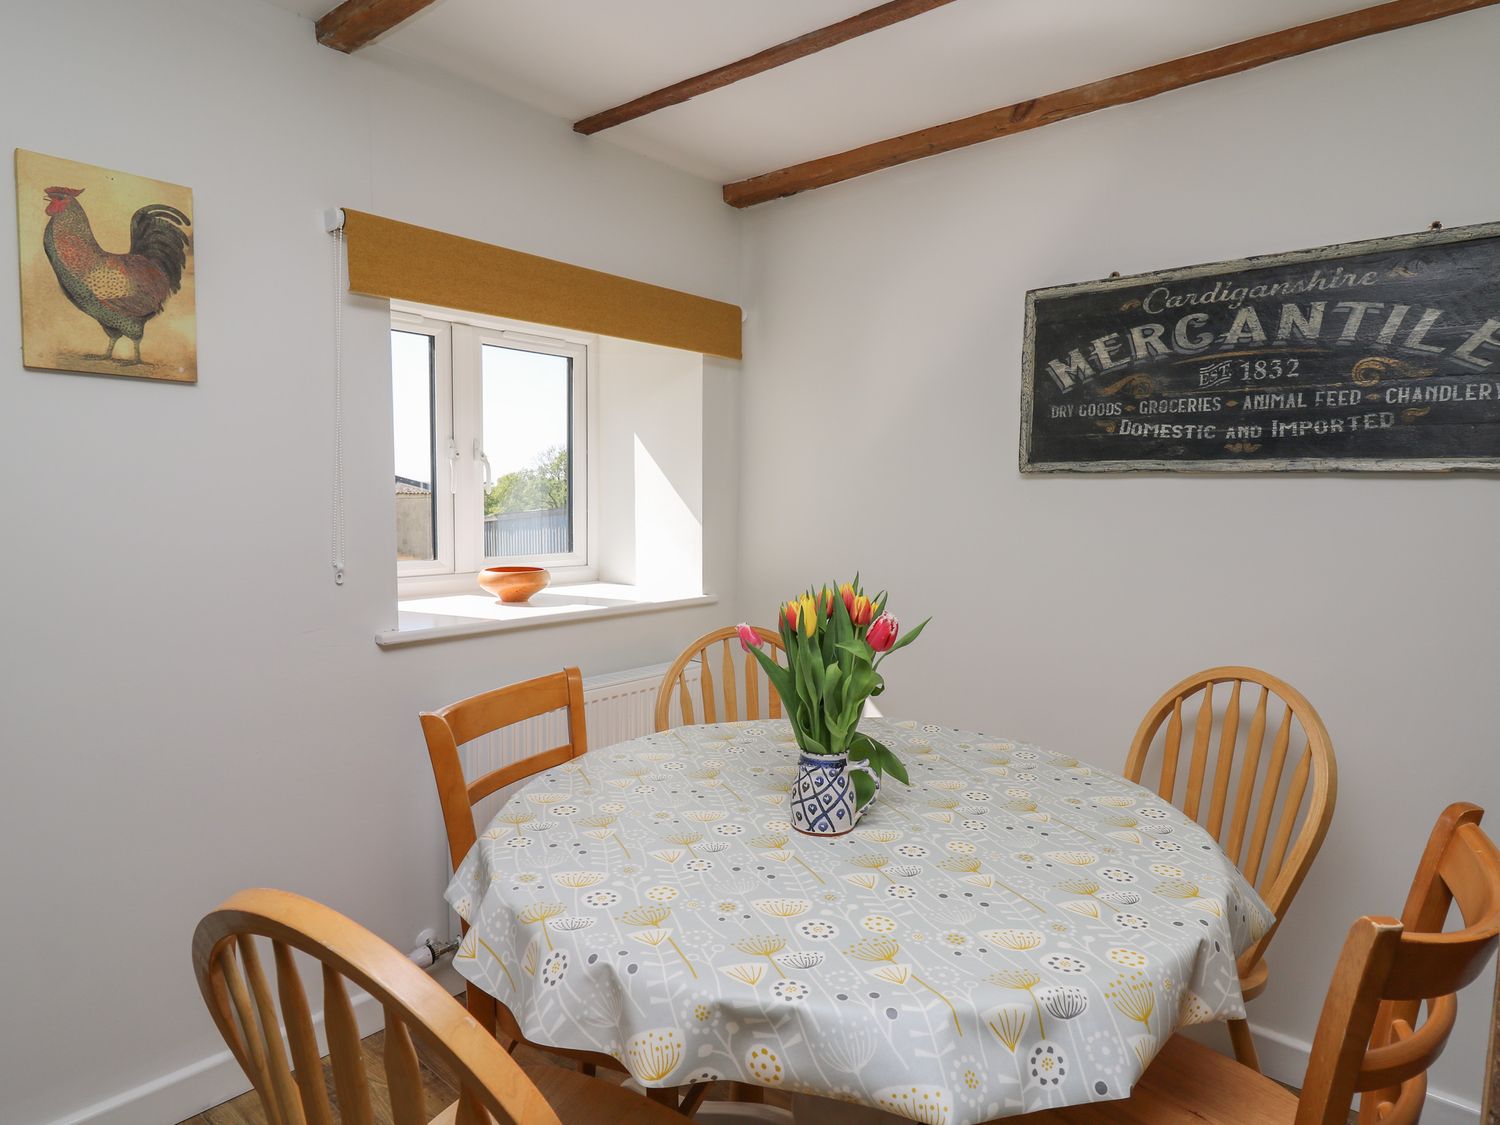 Cattle Tree Cottage near Cardigan, Ceredigion. Wood-fired hot tub. Pet-friendly. Off-road parking. 